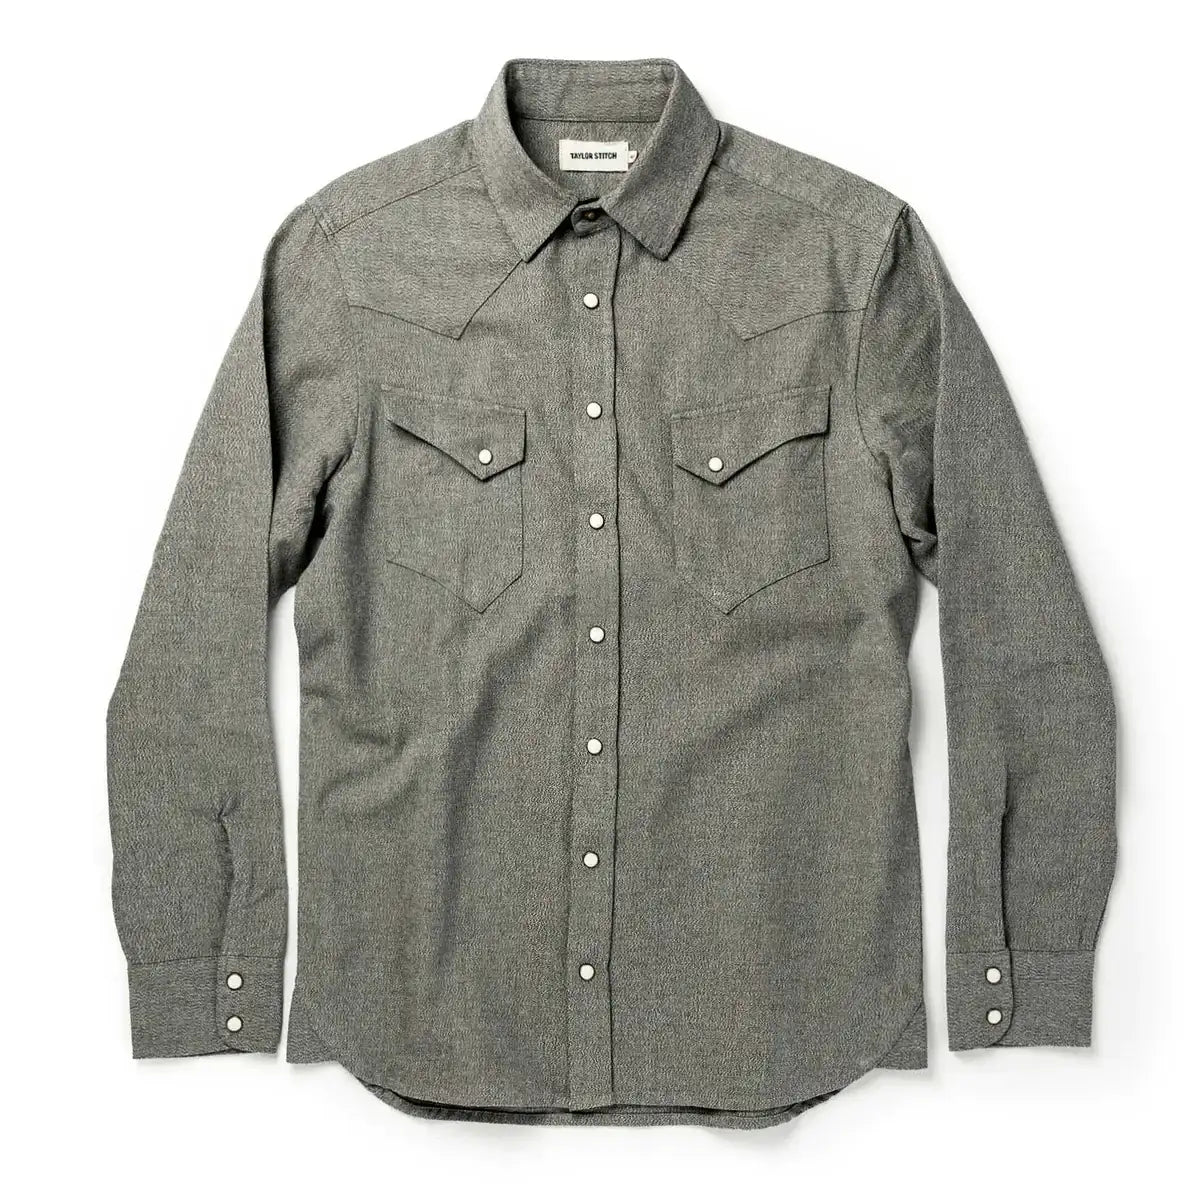 Taylor Stitch - TAYLOR STITCH THE WESTERN SHIRT IN OLIVE MELANGE - Rent With Thred